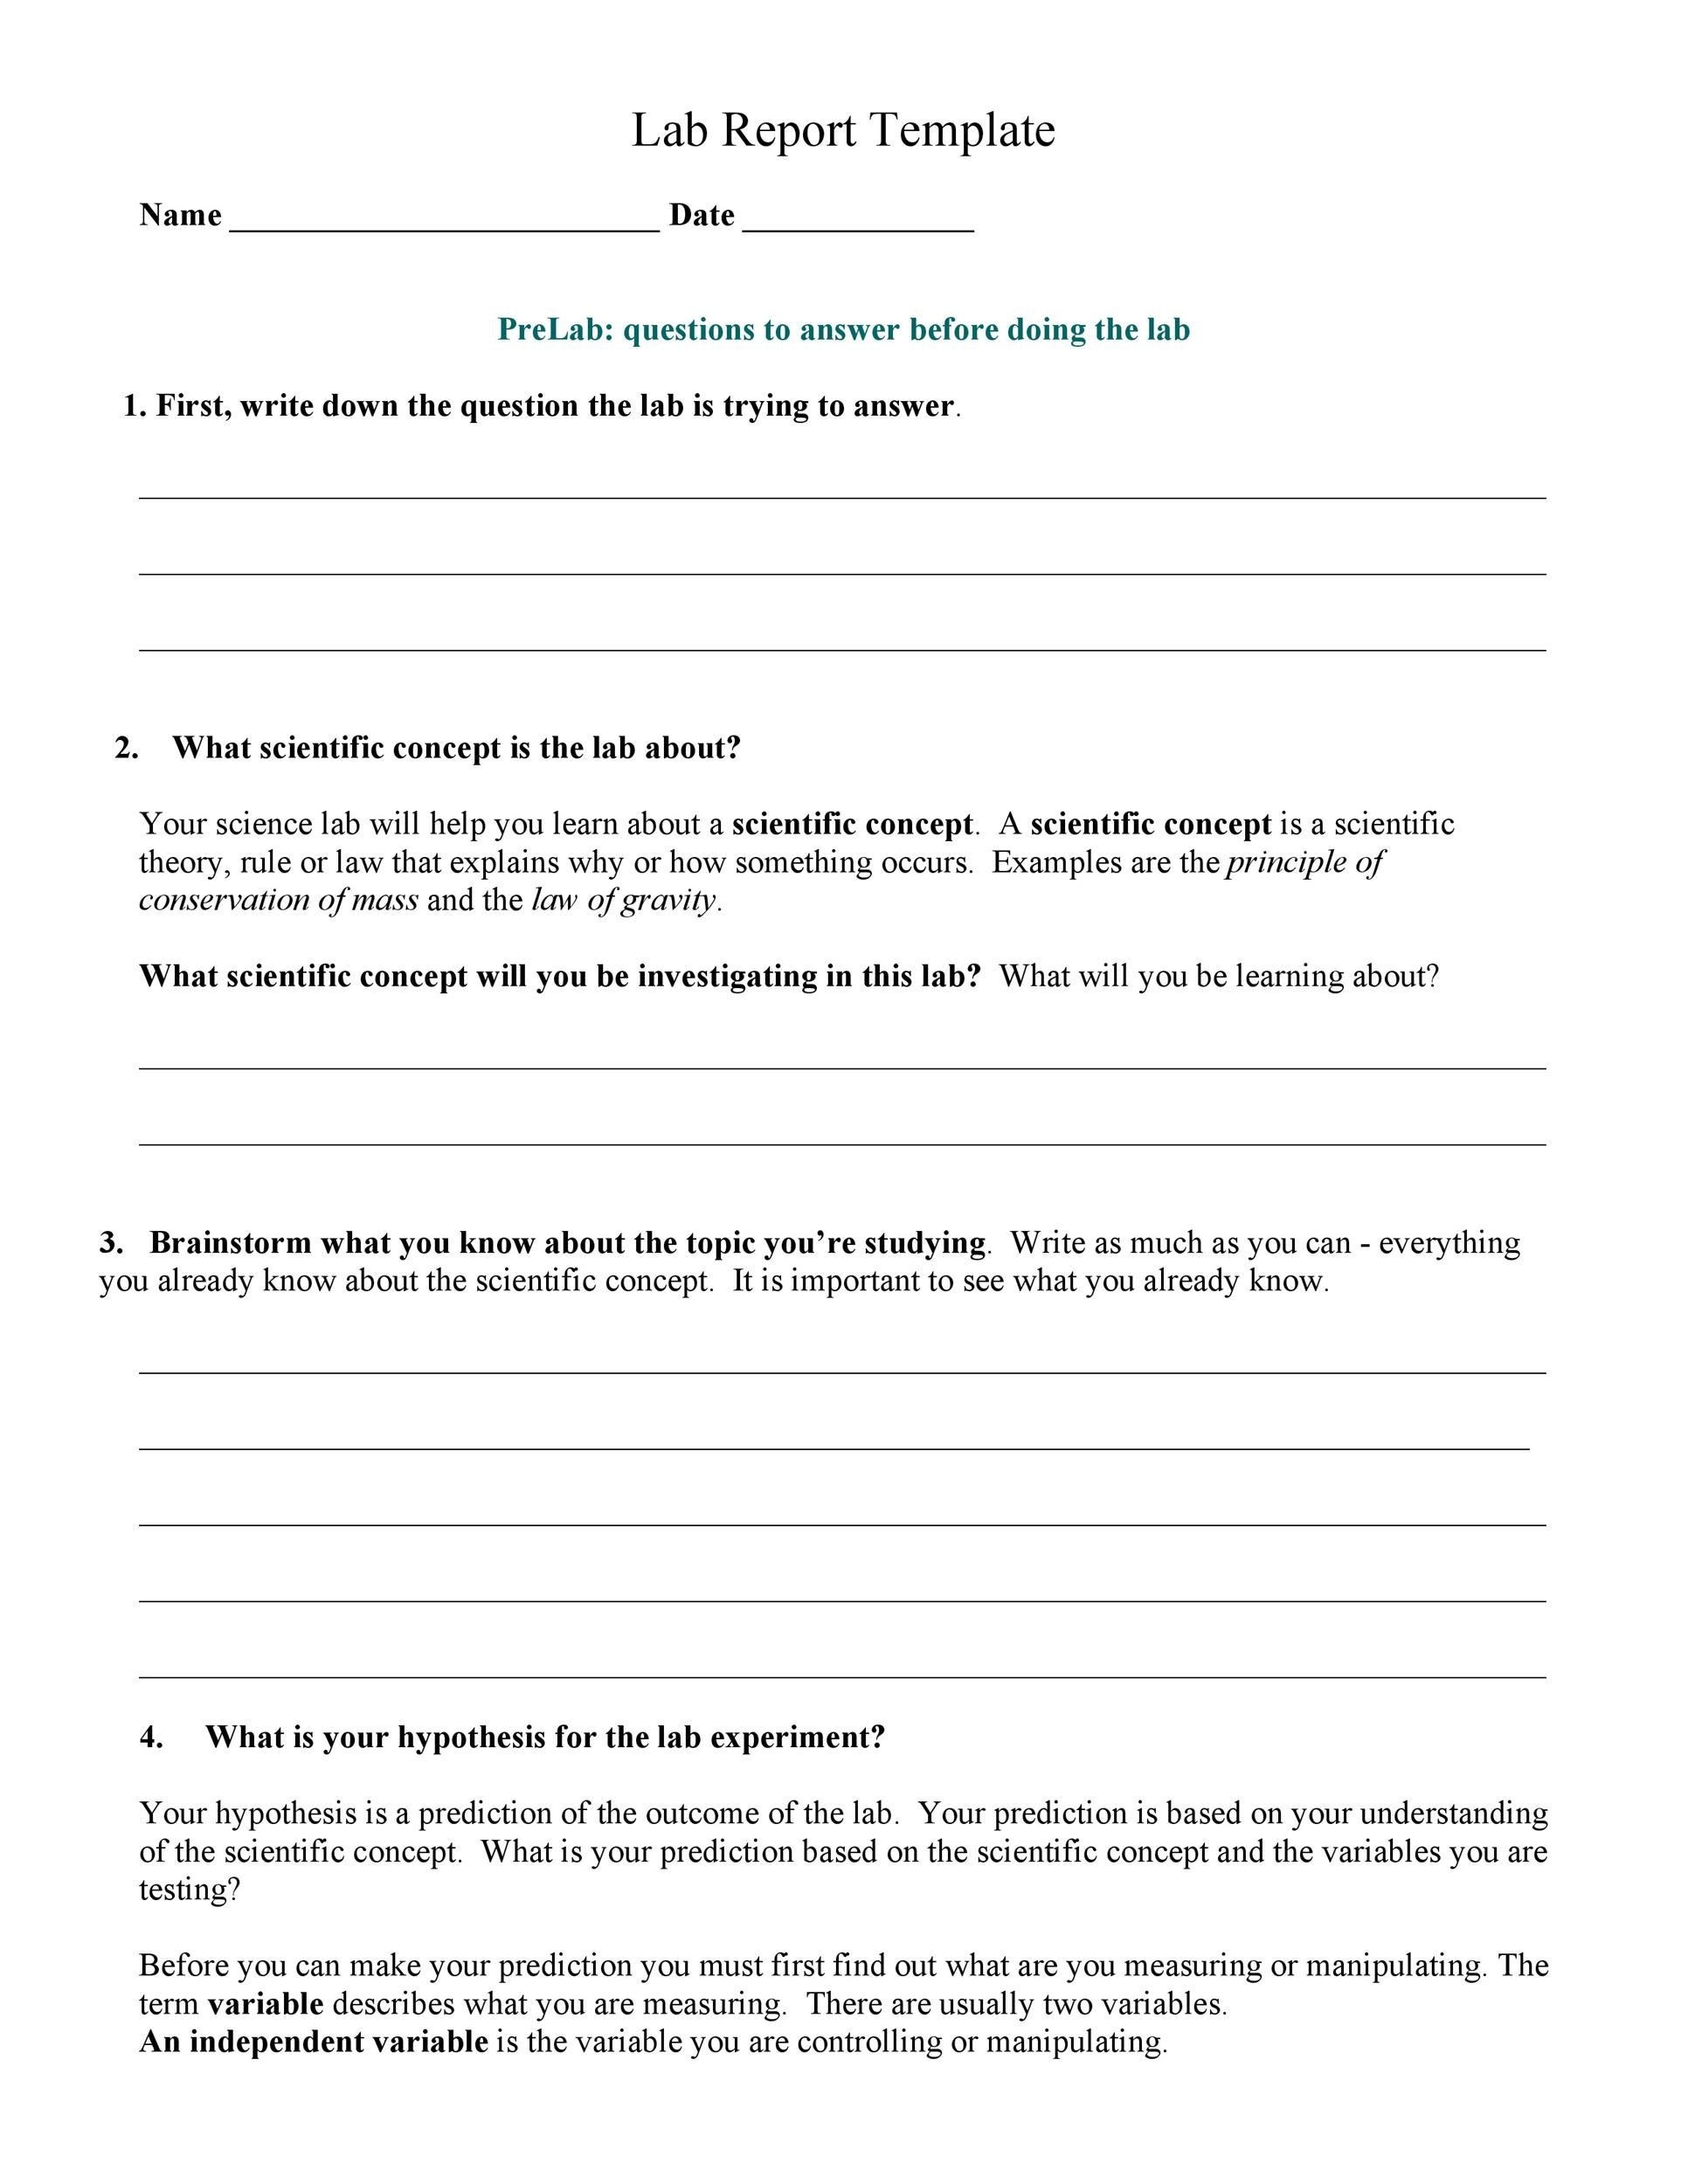 Free lab report template 03